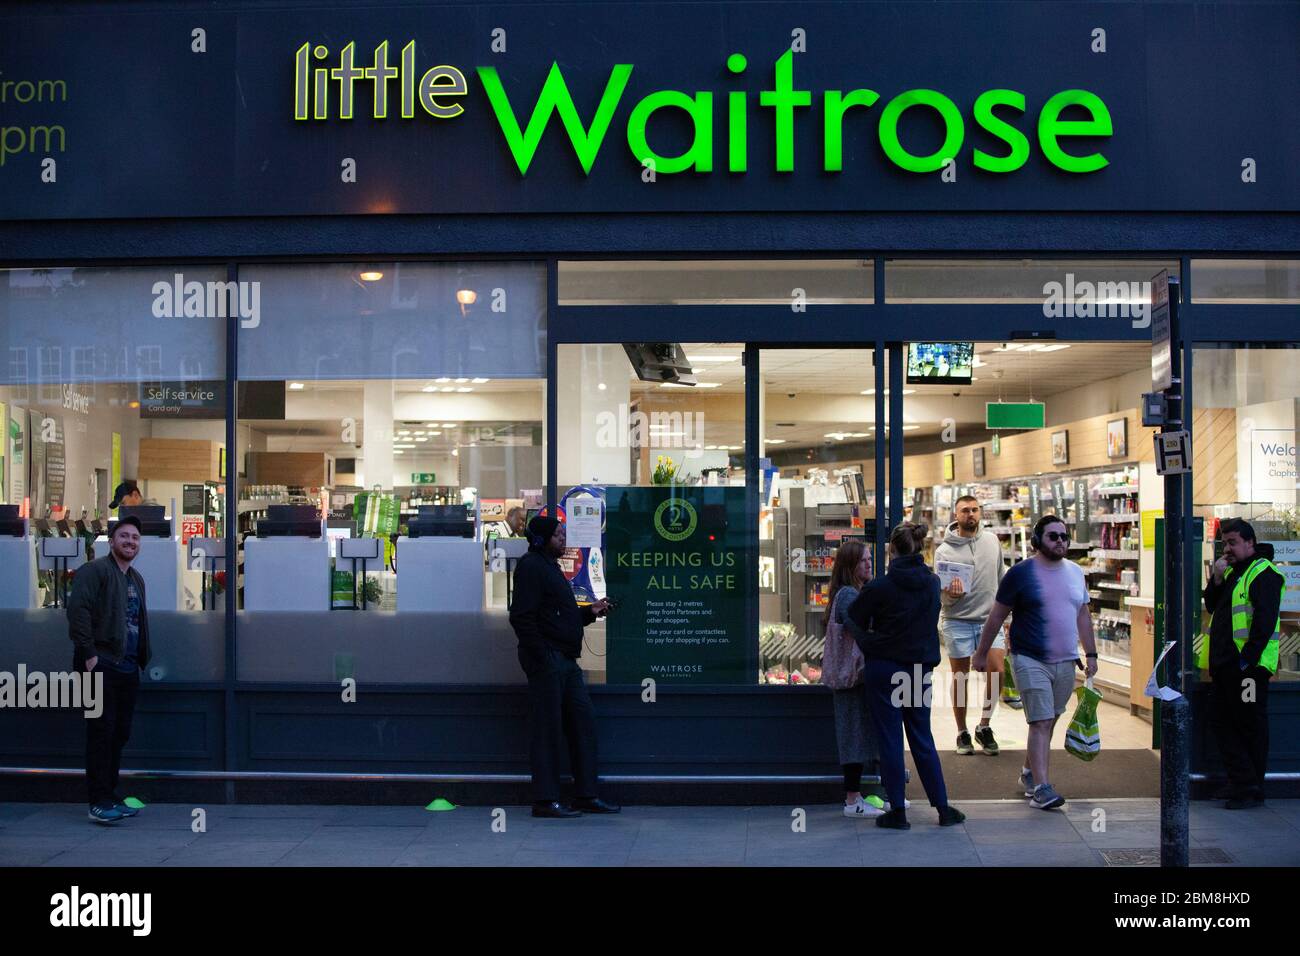 London, UK, 7 May 2020: on Clapham High Street, at a branch of Waitrose, customers wait outside but social distancing rules are not strictly met as shoppers leave and enter the store. Anna Watson/Alamy Live News Stock Photo